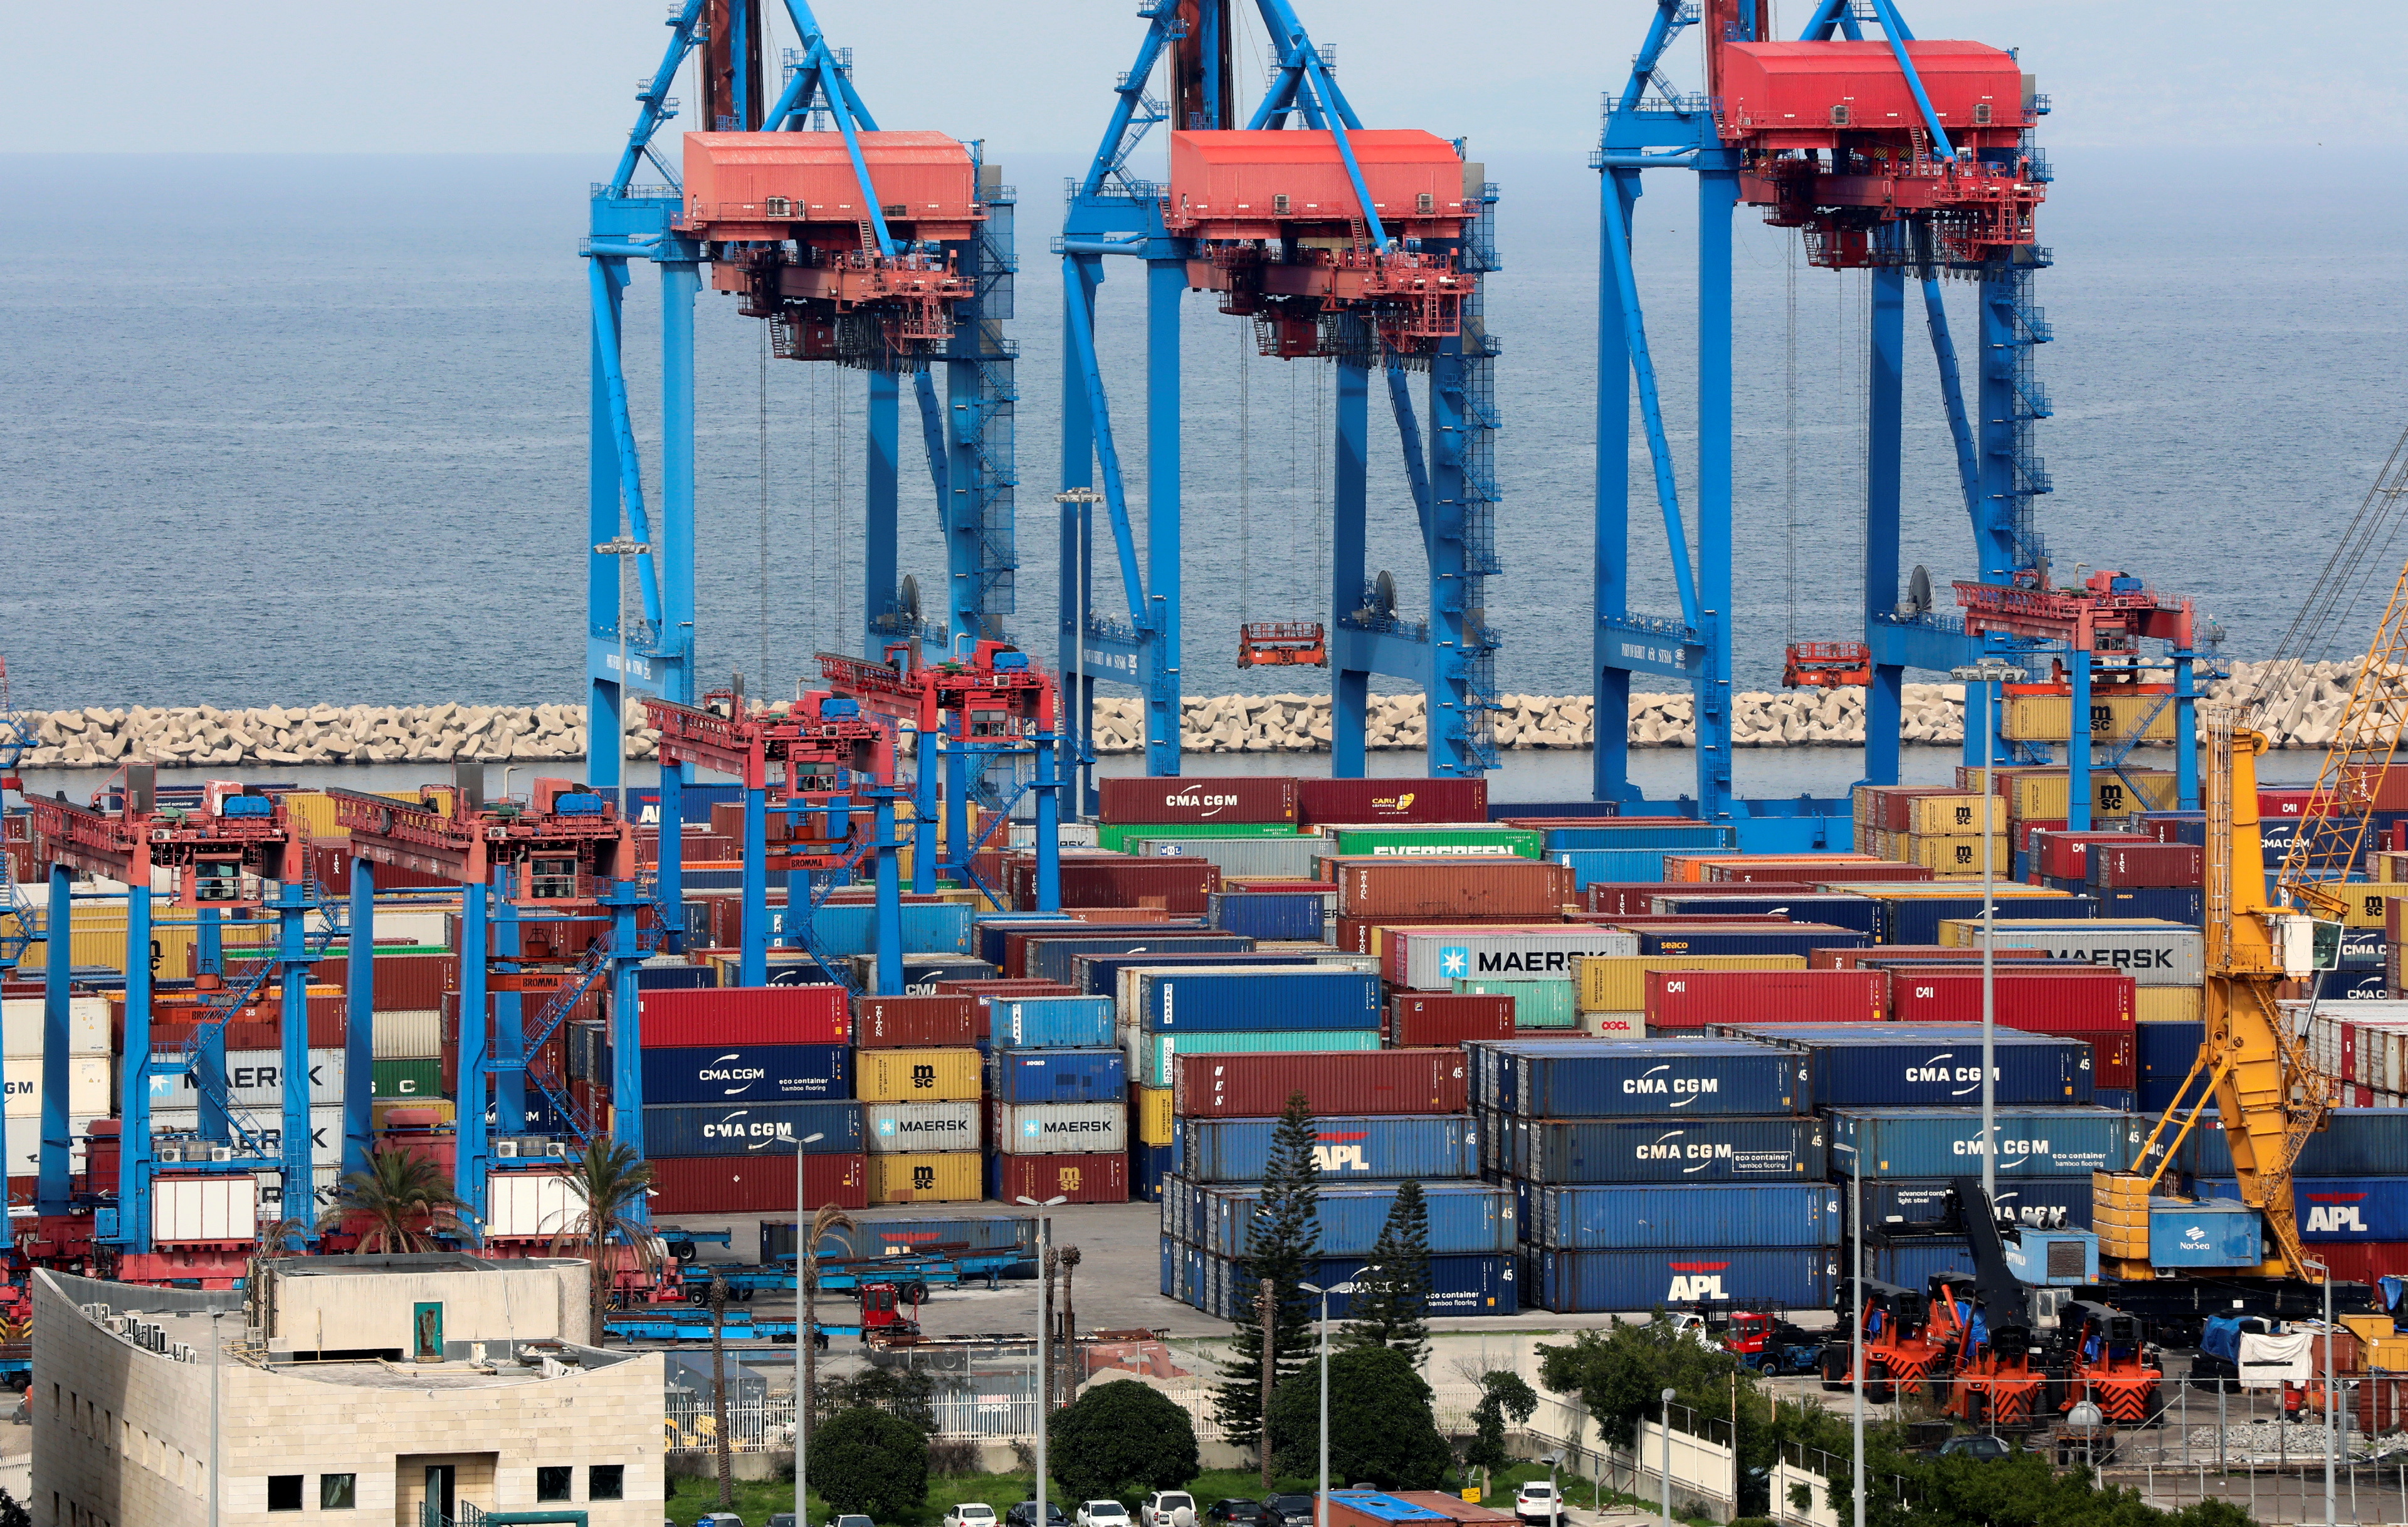 A view shows containers at the port of Beirut